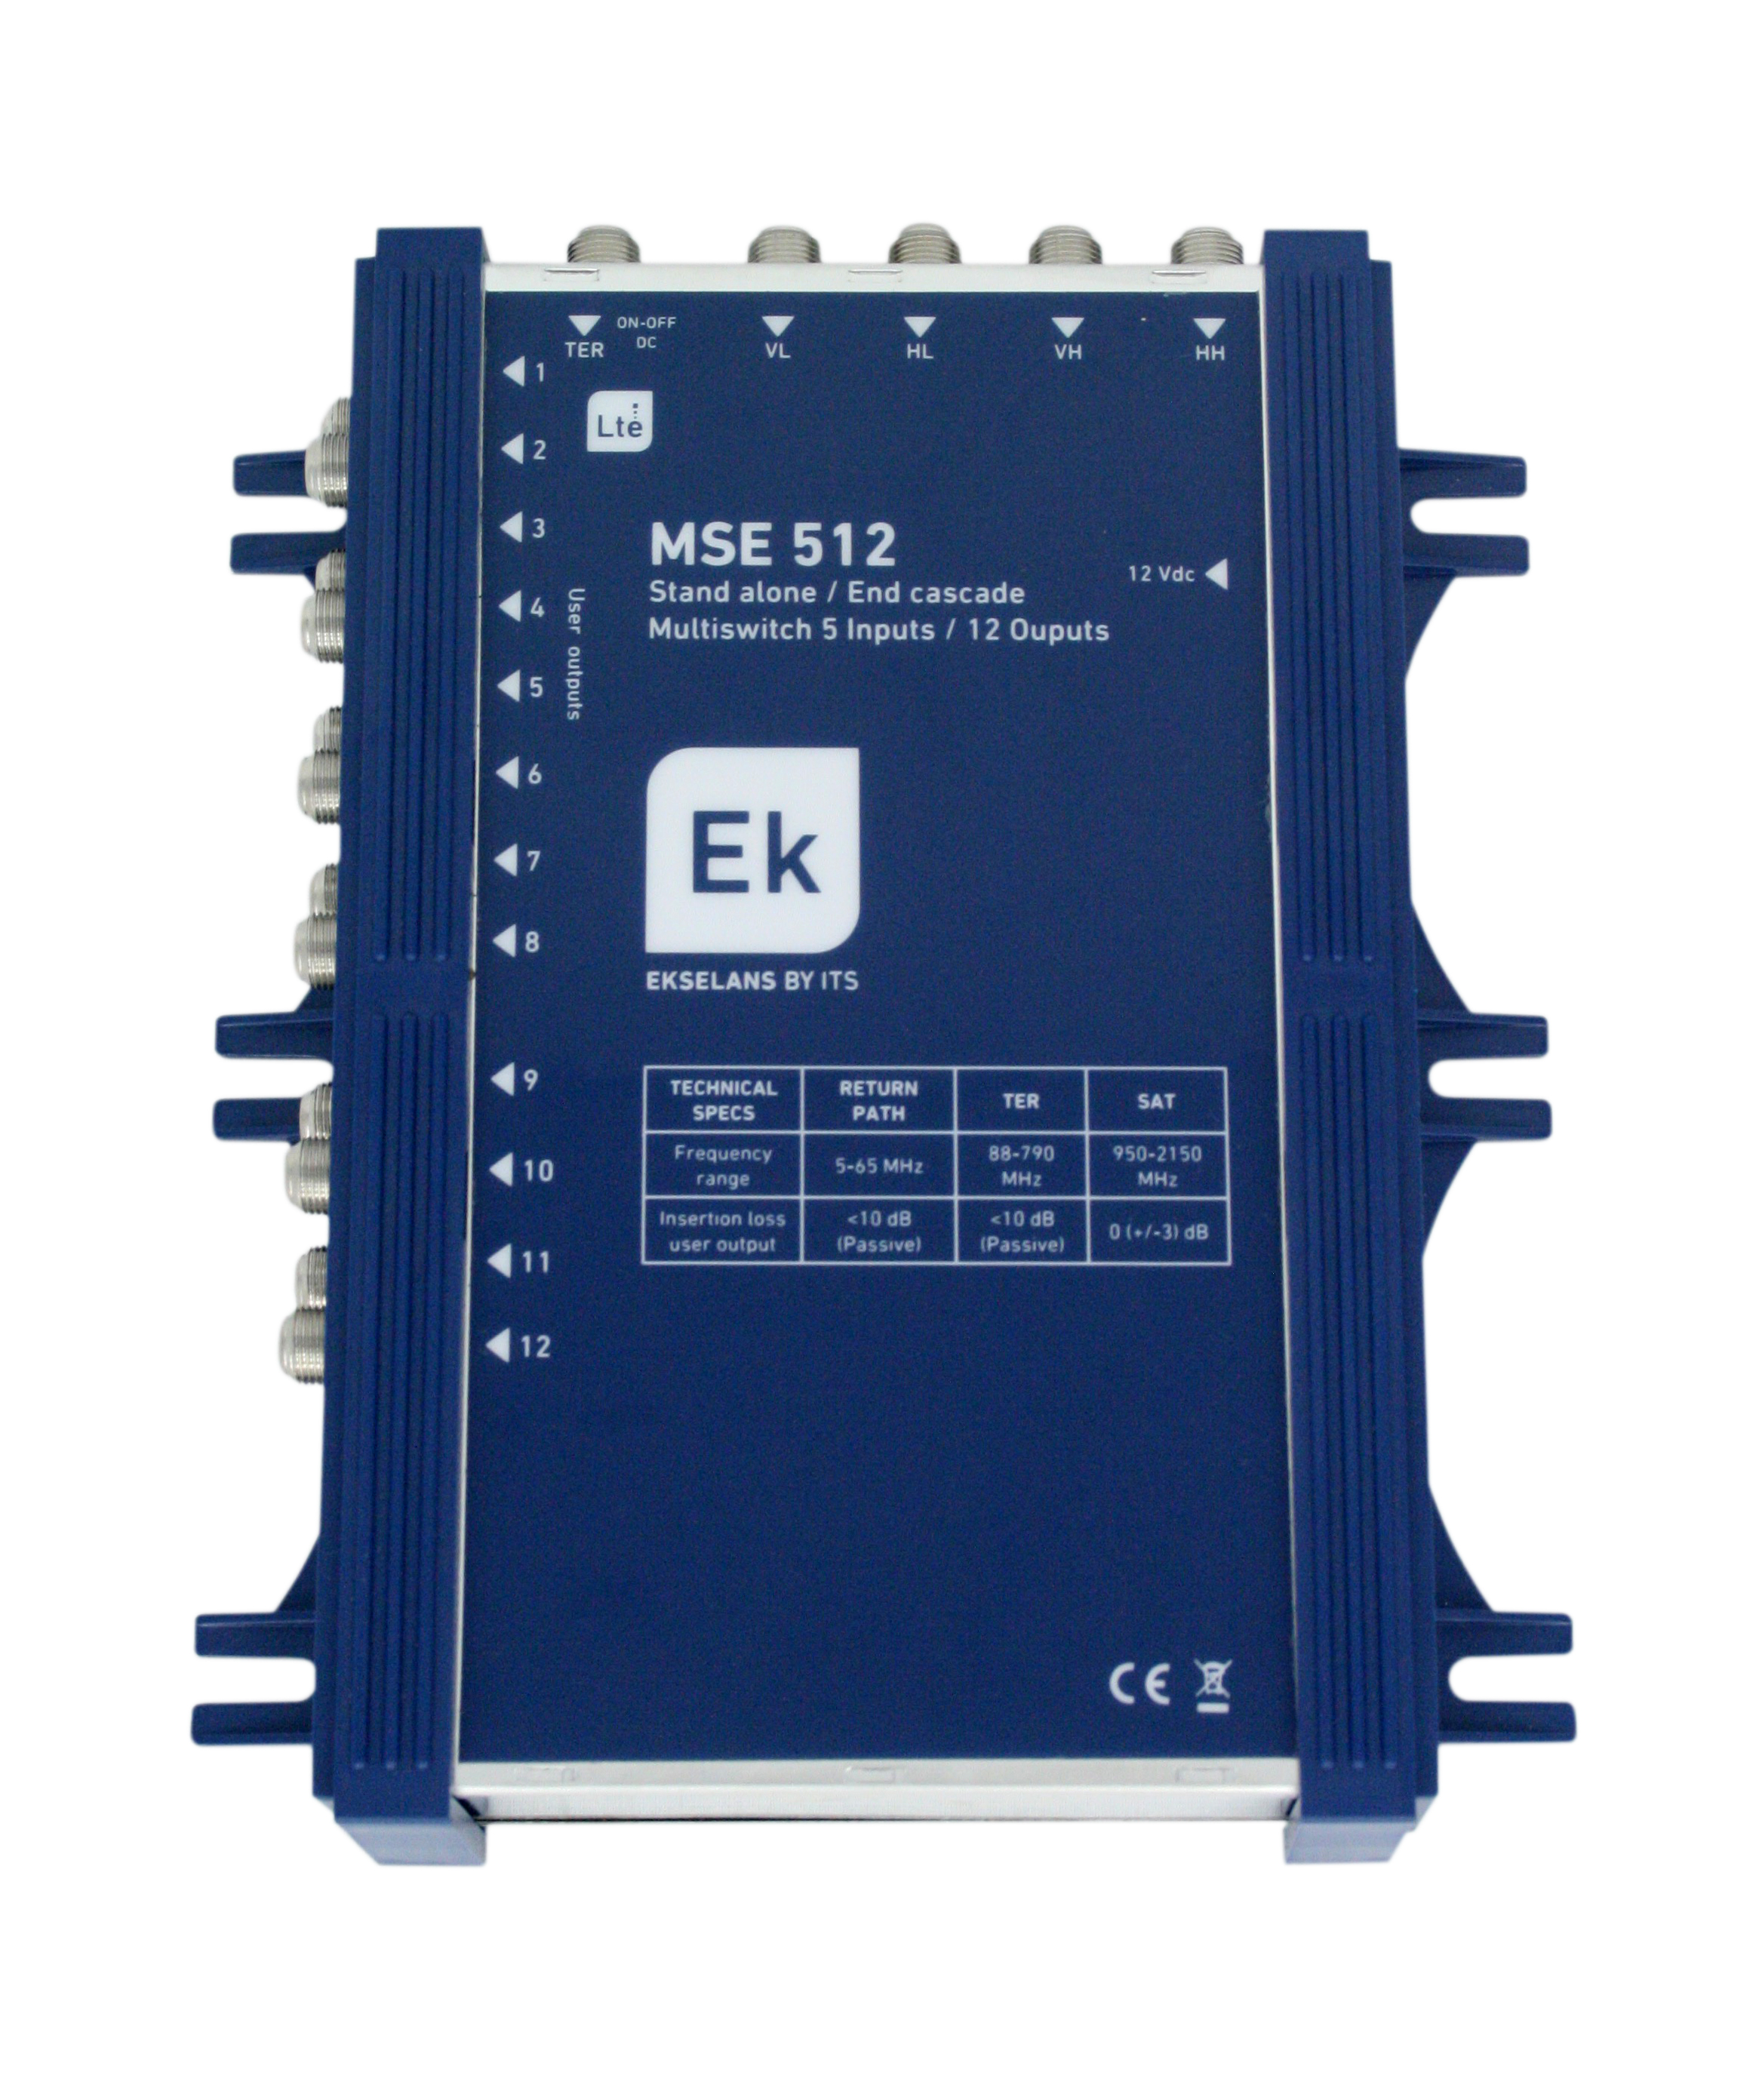 MSE 512